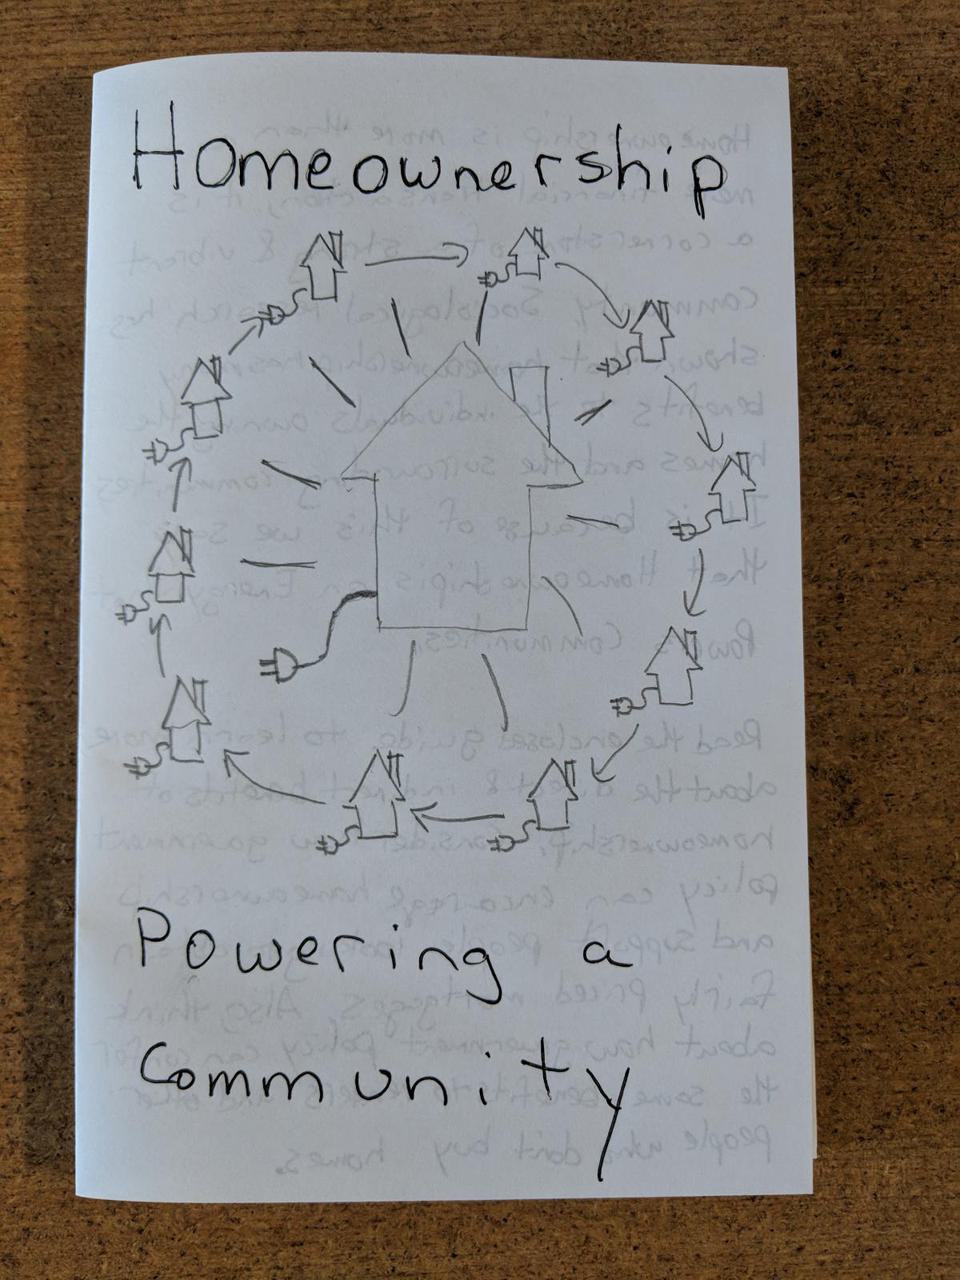 house illustration in center with small, identical house illustrations in a ring around center house. The text says "Homeownership" and "Powering a Community".